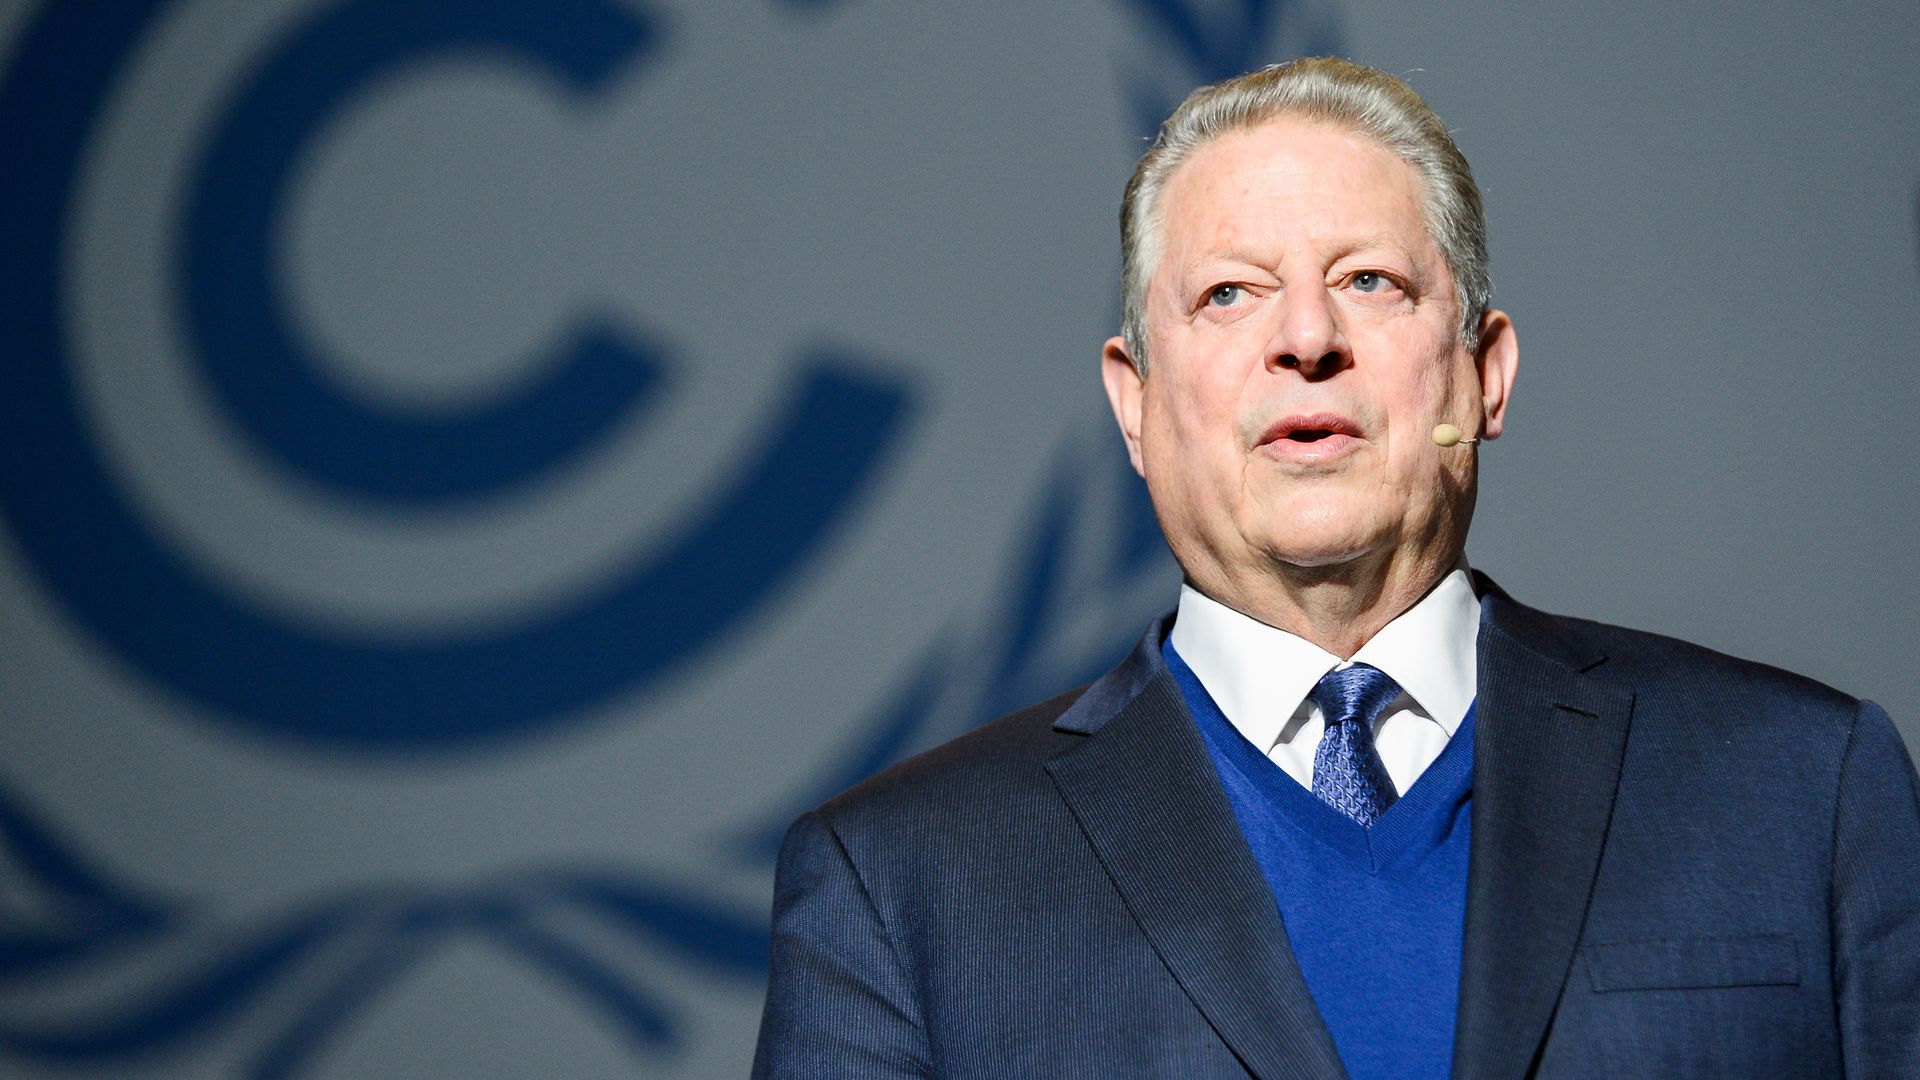 Al Gore, Former U.S. Vice President and Chairman of The Climate Reality Project seen speaking during the Climate Crisis and its Solutions presentation at the COP24 UN Climate Change Conference 2018. 